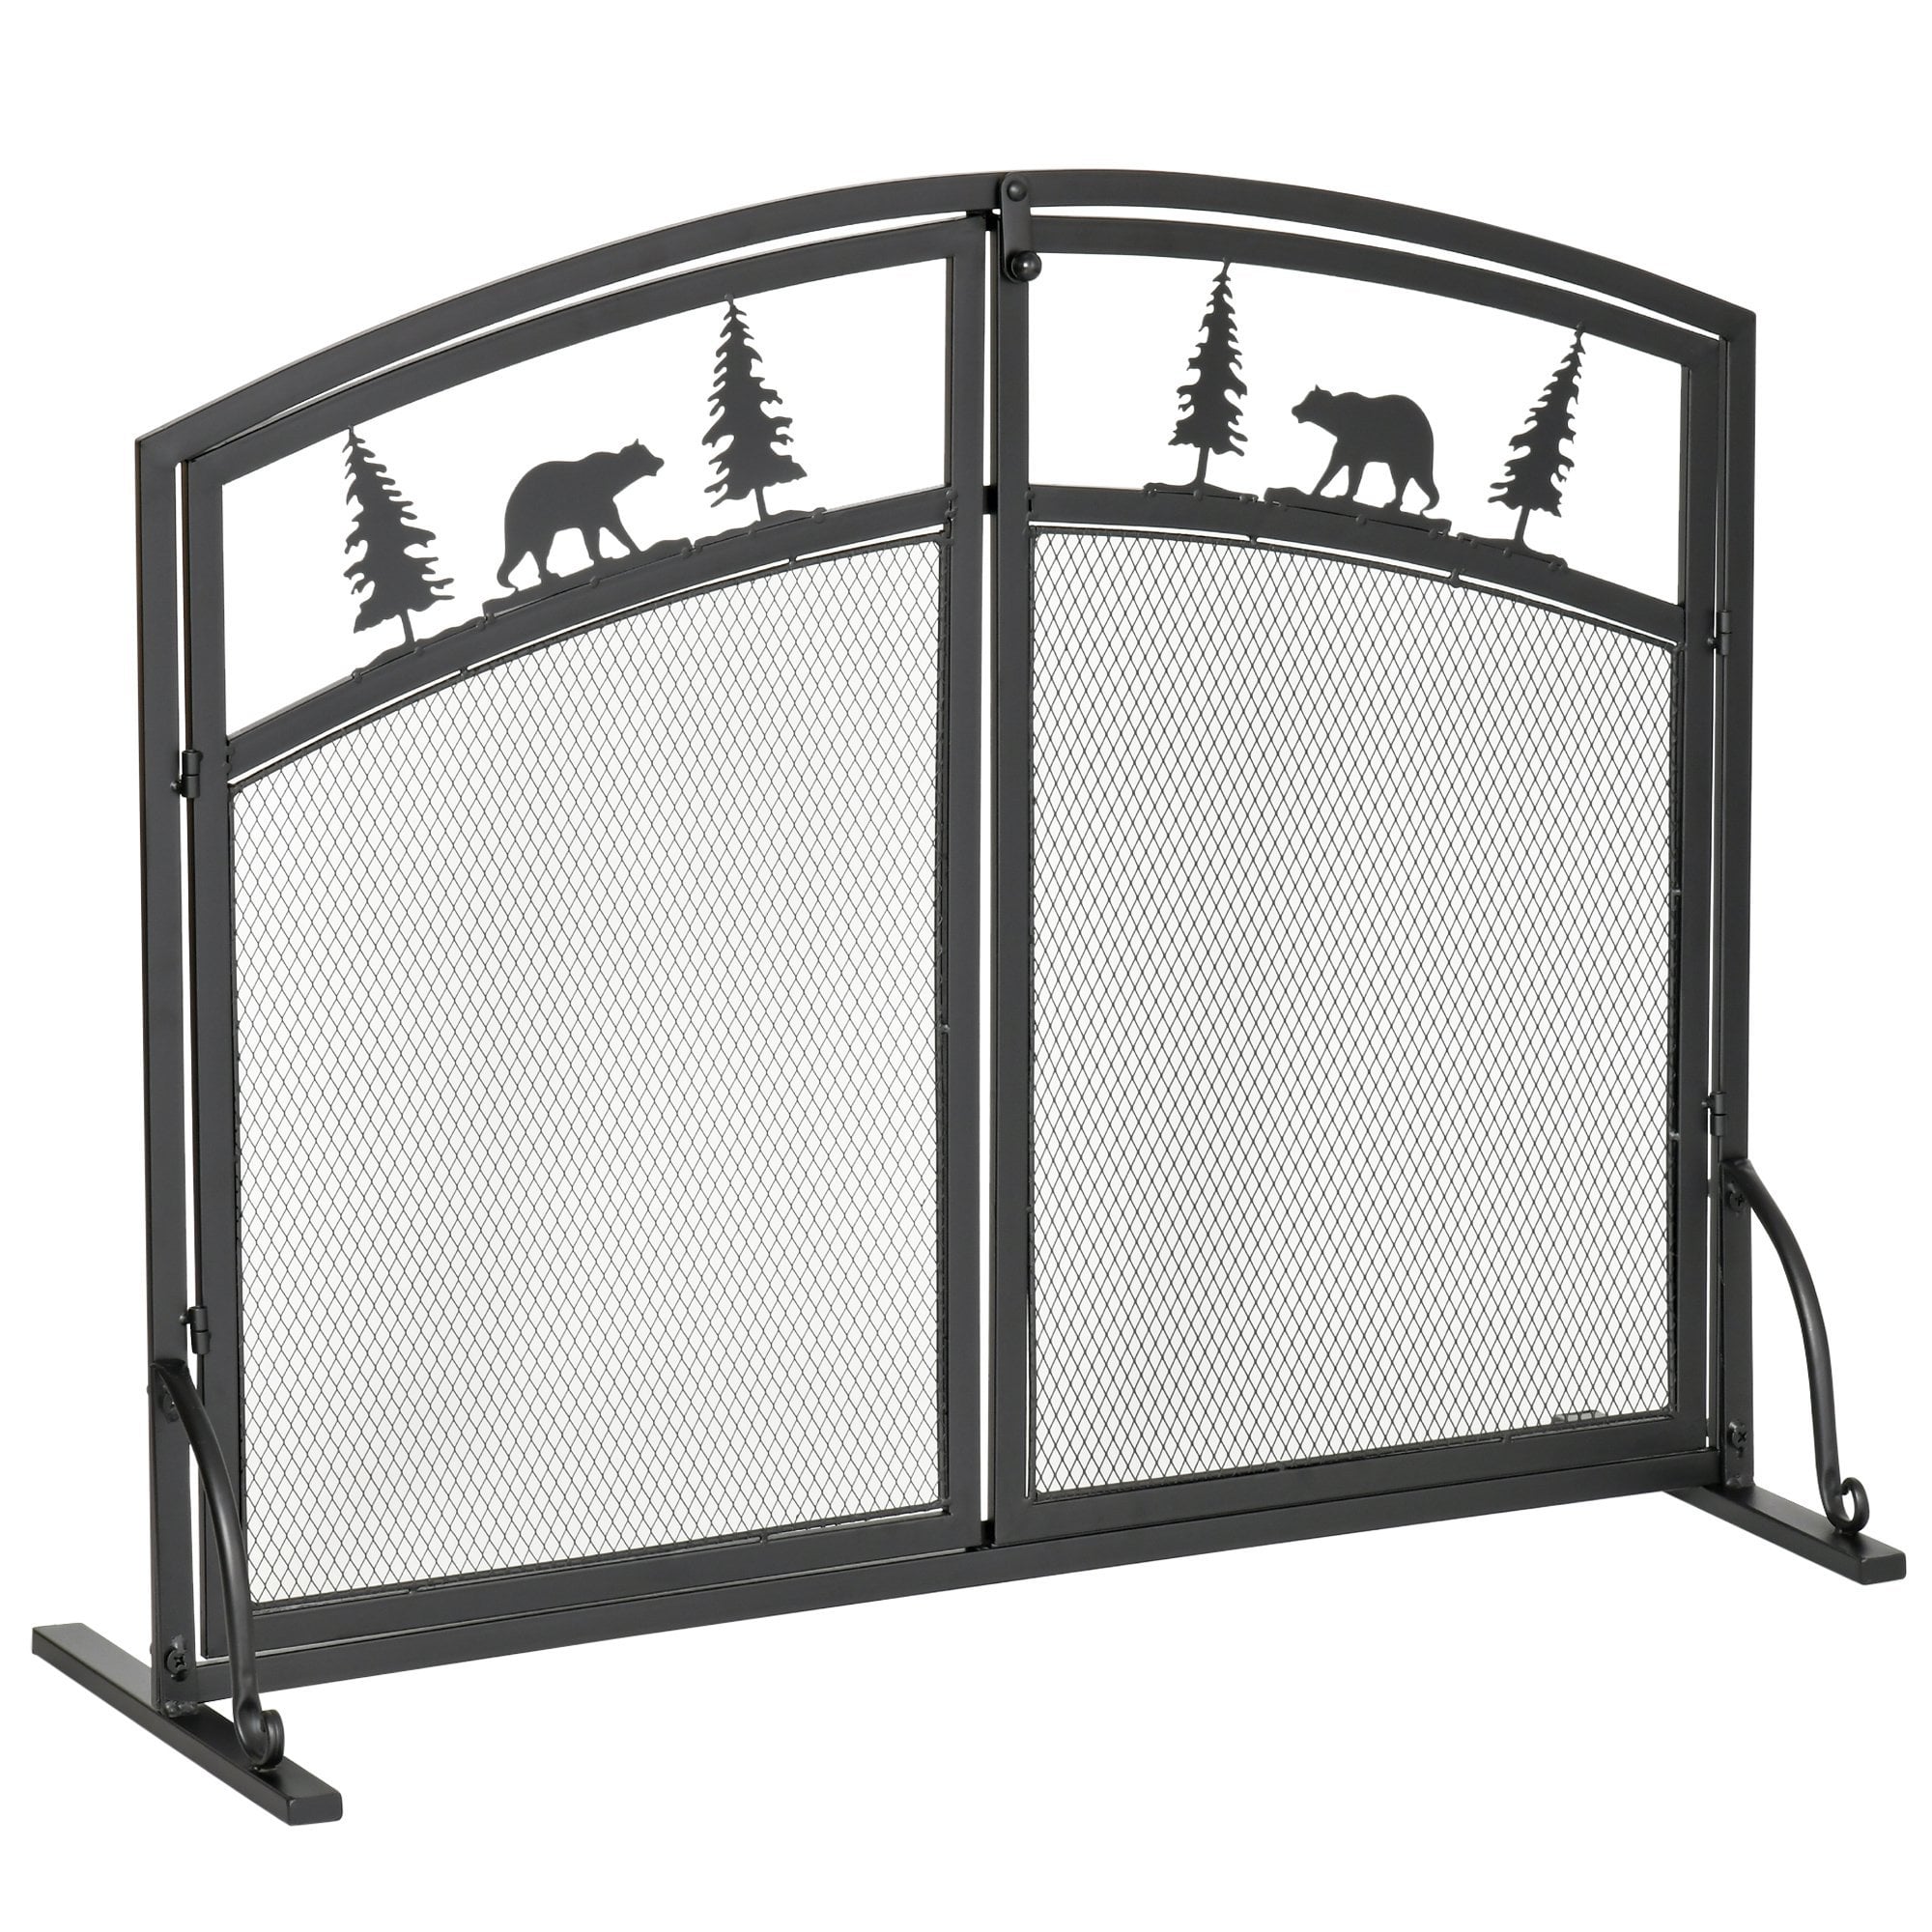 HOMCOM Fire Guard with Double Doors - Metal Mesh Fireplace Screen - Spark Flame Barrier with Tree Decoration for Living Room - Bedroom Decor Screen Ro